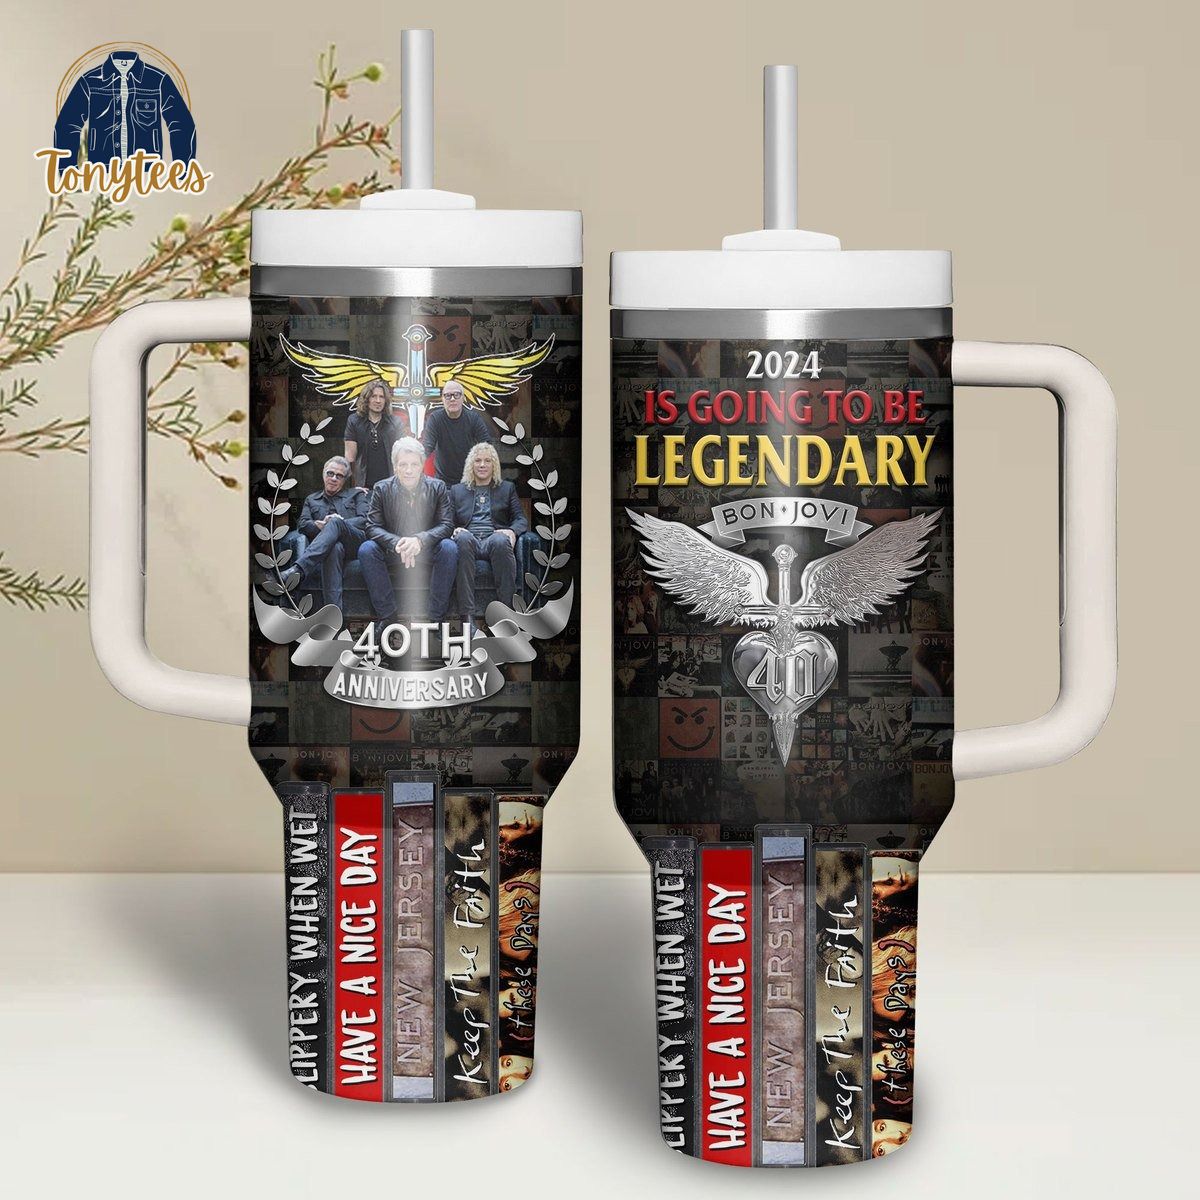 Bon Jovi 2024 is going to be legendary 40th anniversary stanley tumbler